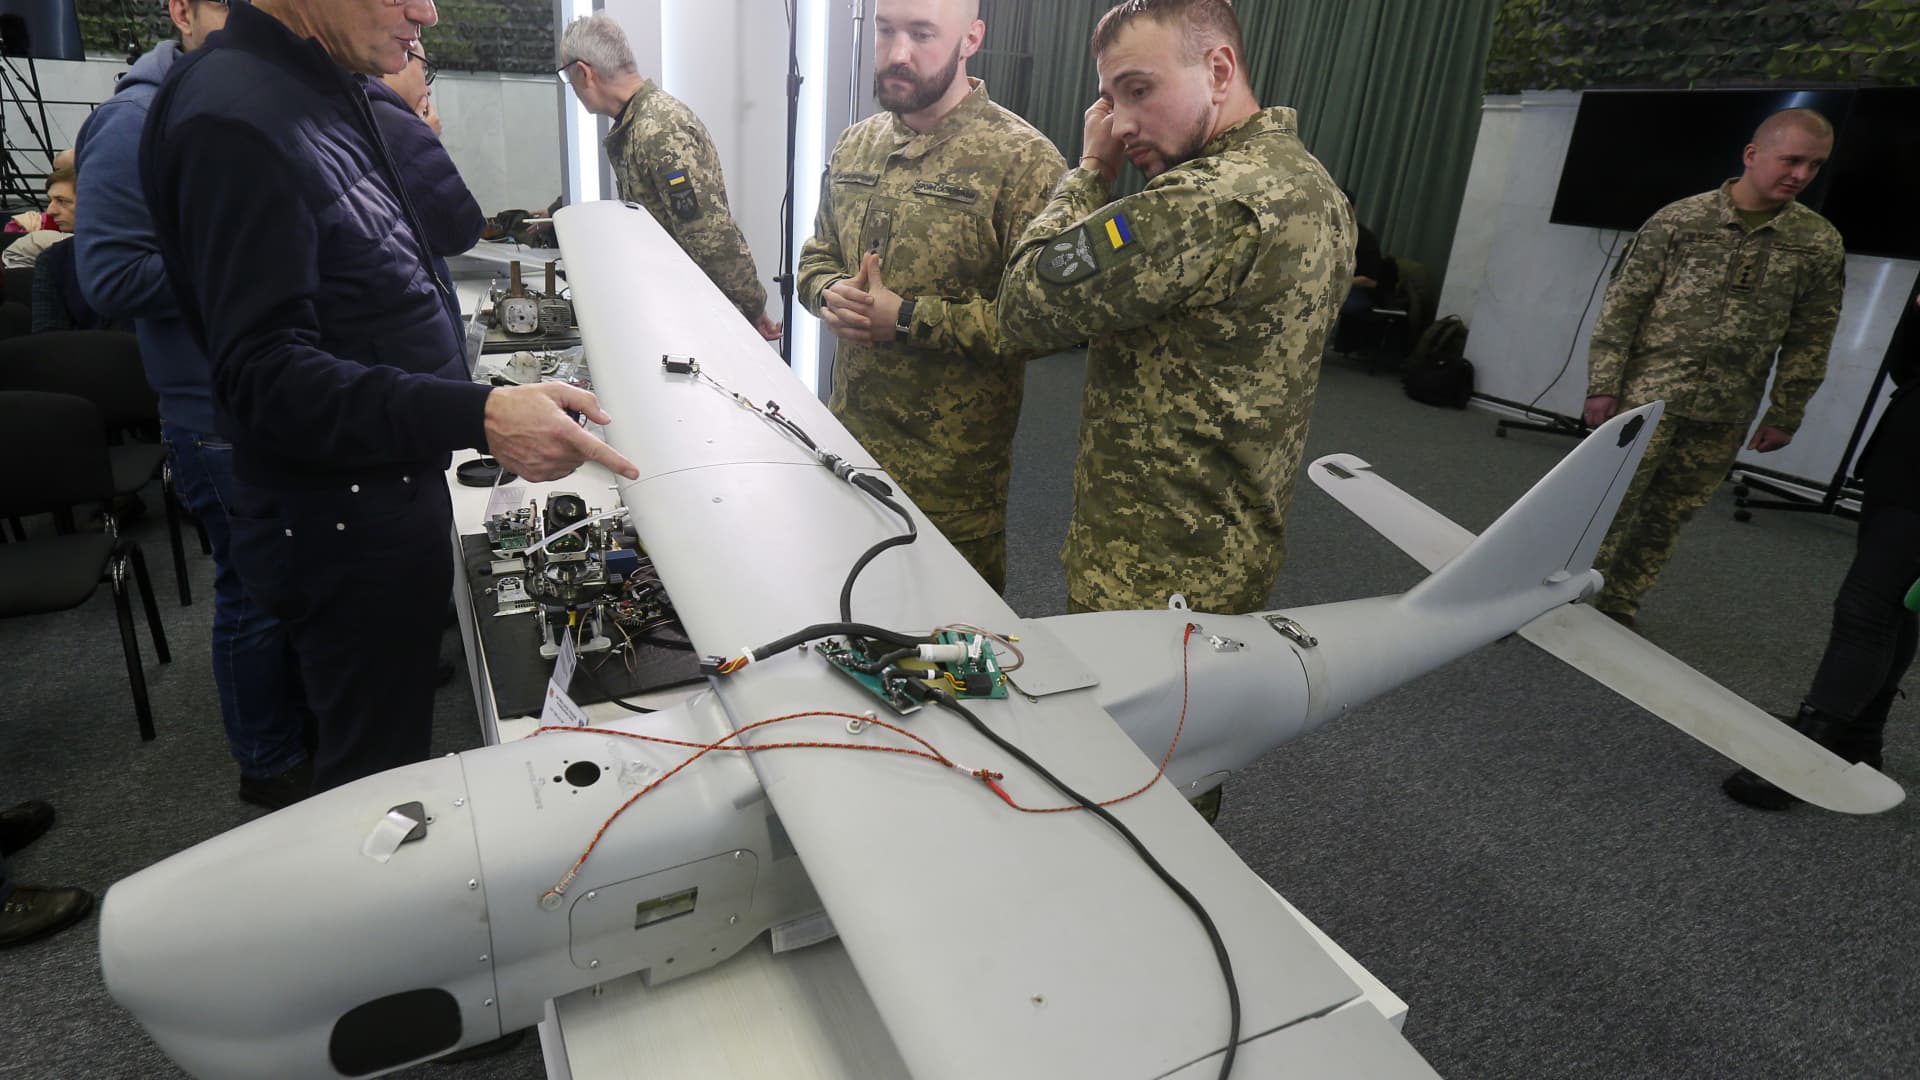 Parts of UAV (unmanned aerial vehicles): Orlan-10, Granat-3 , Shahed-136, Eleron-3-SV, used by the Russia against Ukraine, are seen during a media briefing of the Security and Defense Forces of Ukraine in Kyiv, Ukraine on 15 December 2022.